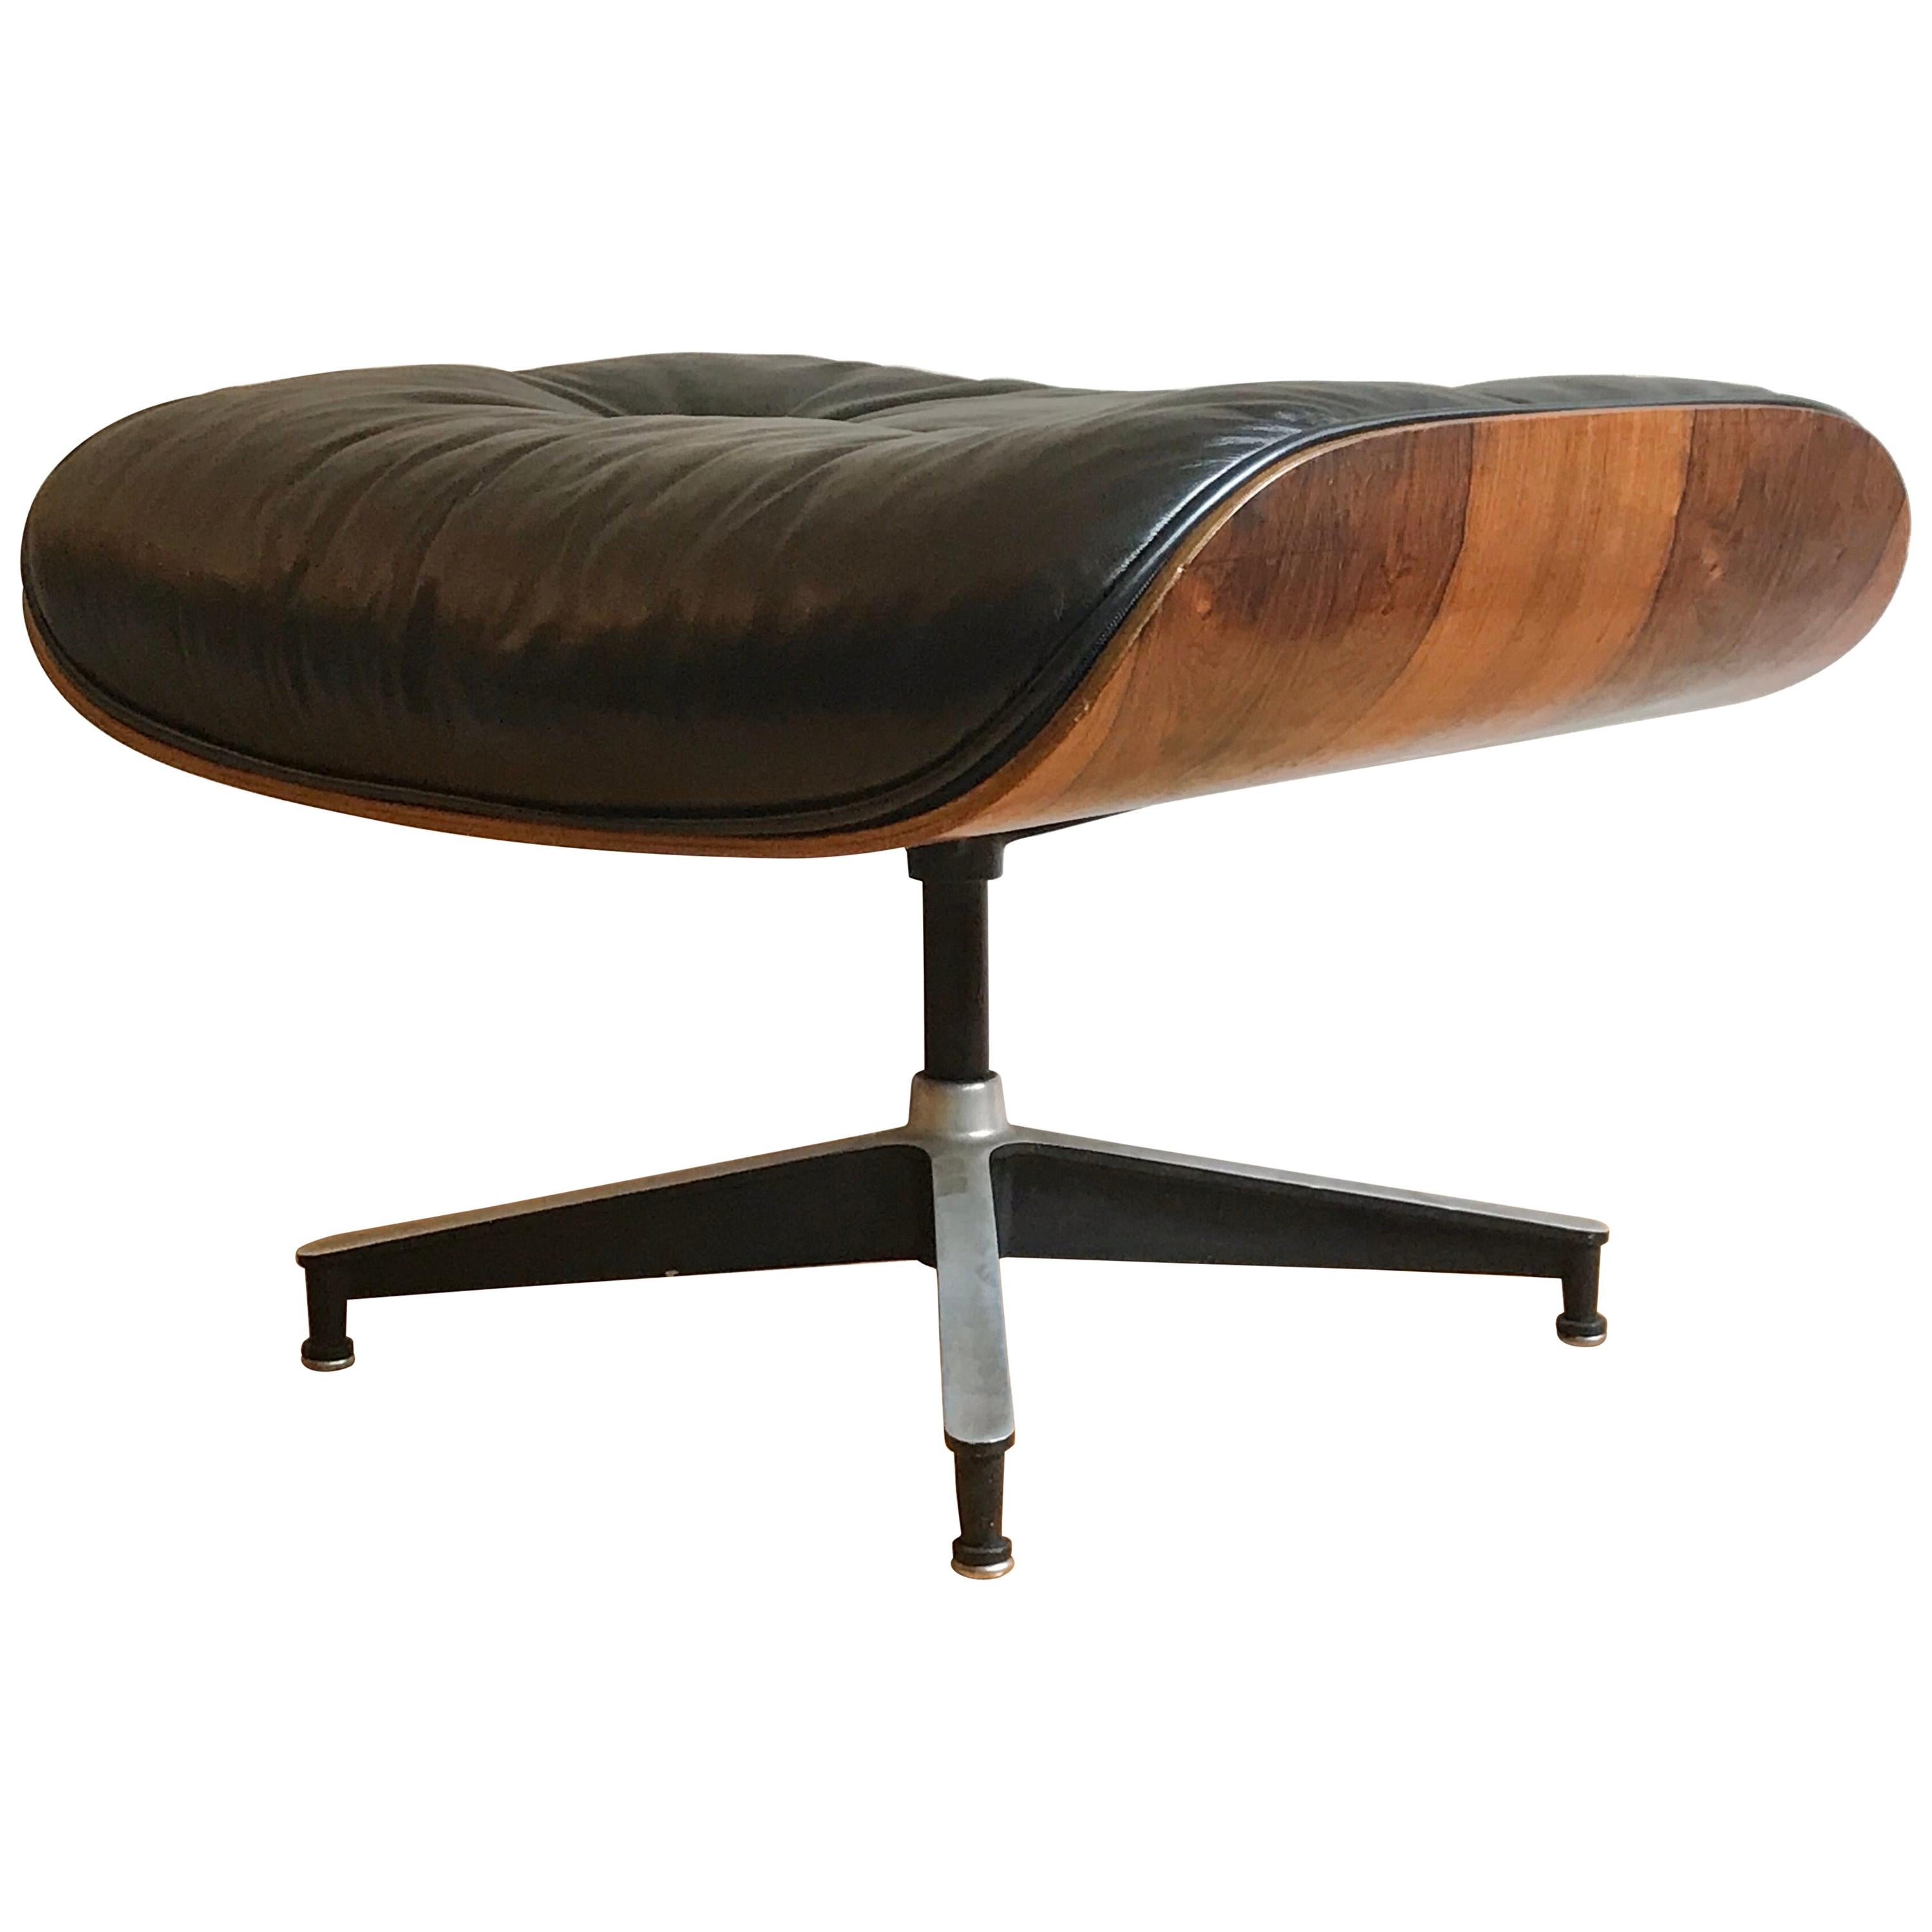 Charles Eames Rosewood and Leather Ottoman